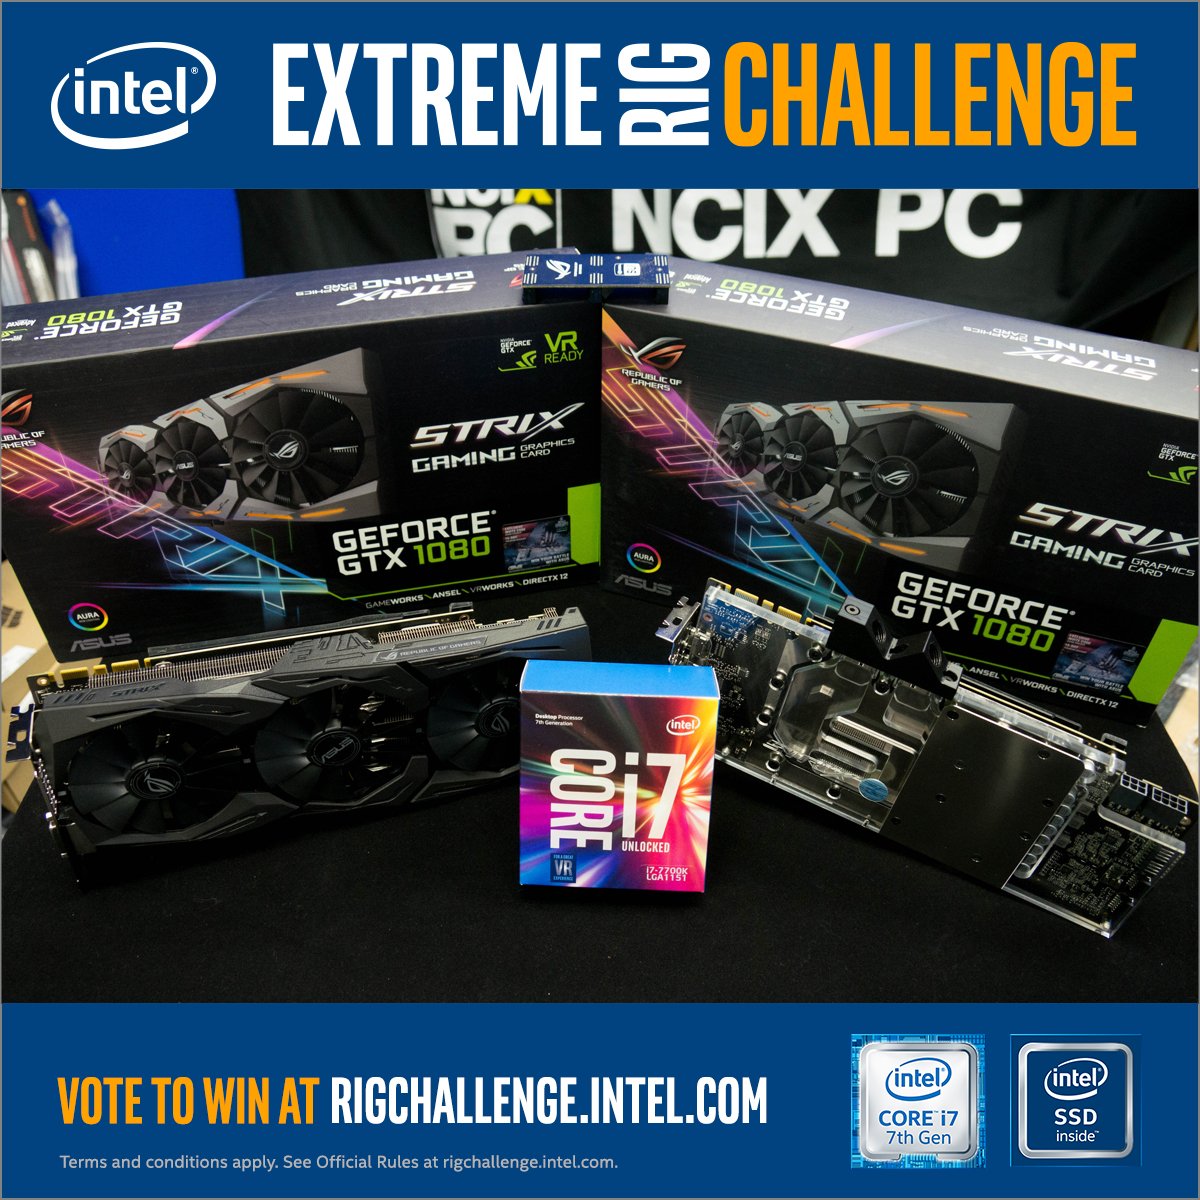 We're at it again! Make sure you vote @NCIXdotCOM in #RigChallengeSweepstakes for a chance to win 1 of 7 $10K PCs! ncix.com/article/Intel-…